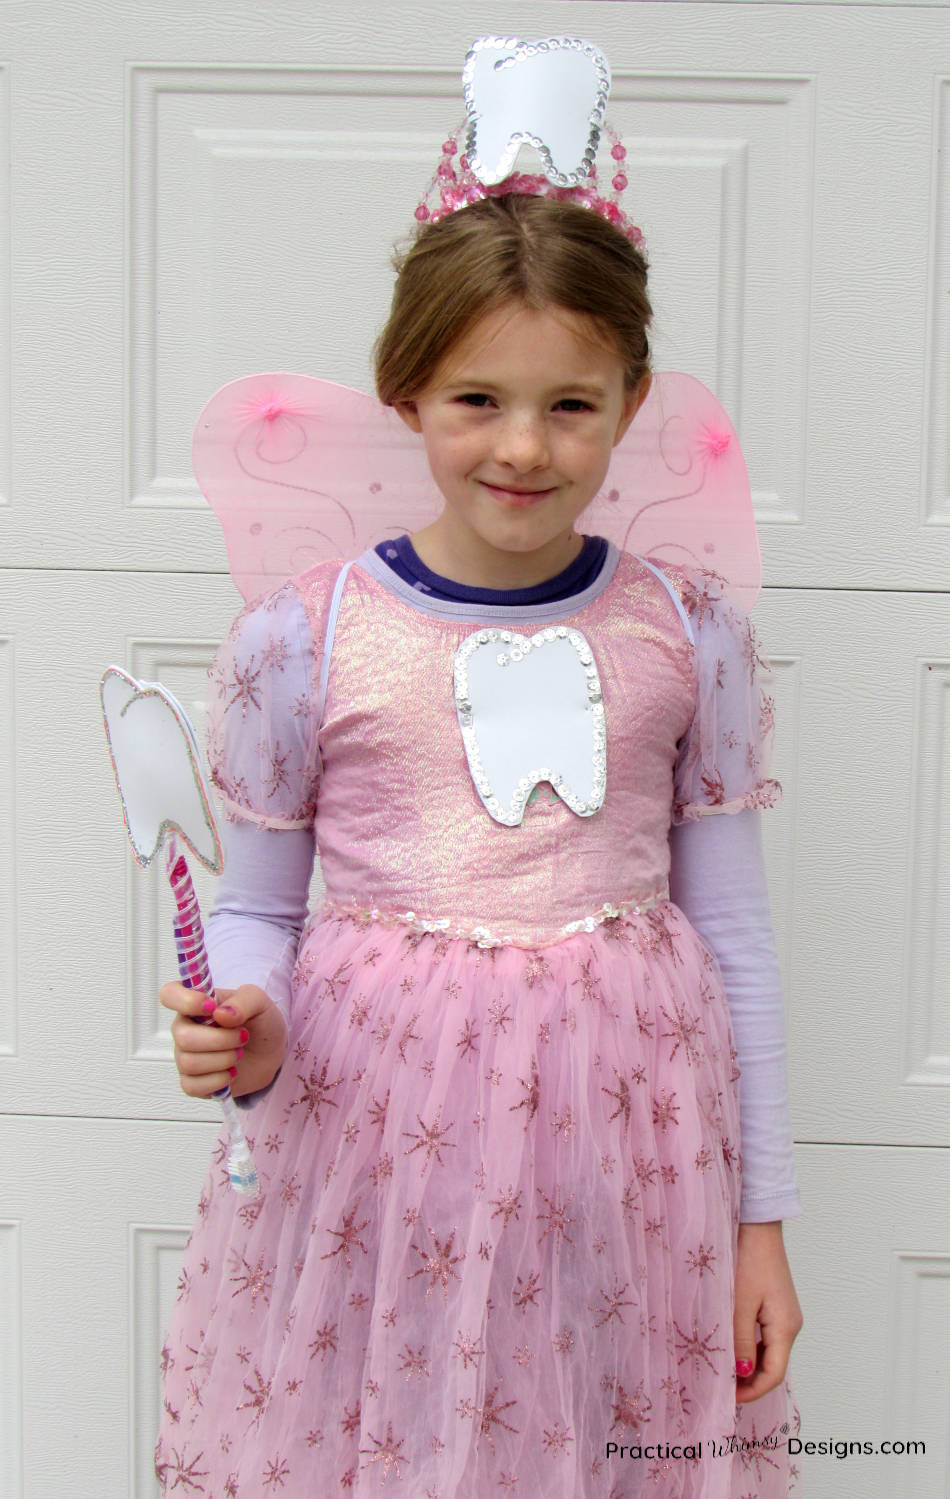 DIY Tooth Fairy Costumes
 Easy Tooth Fairy Costume Practical Whimsy Designs